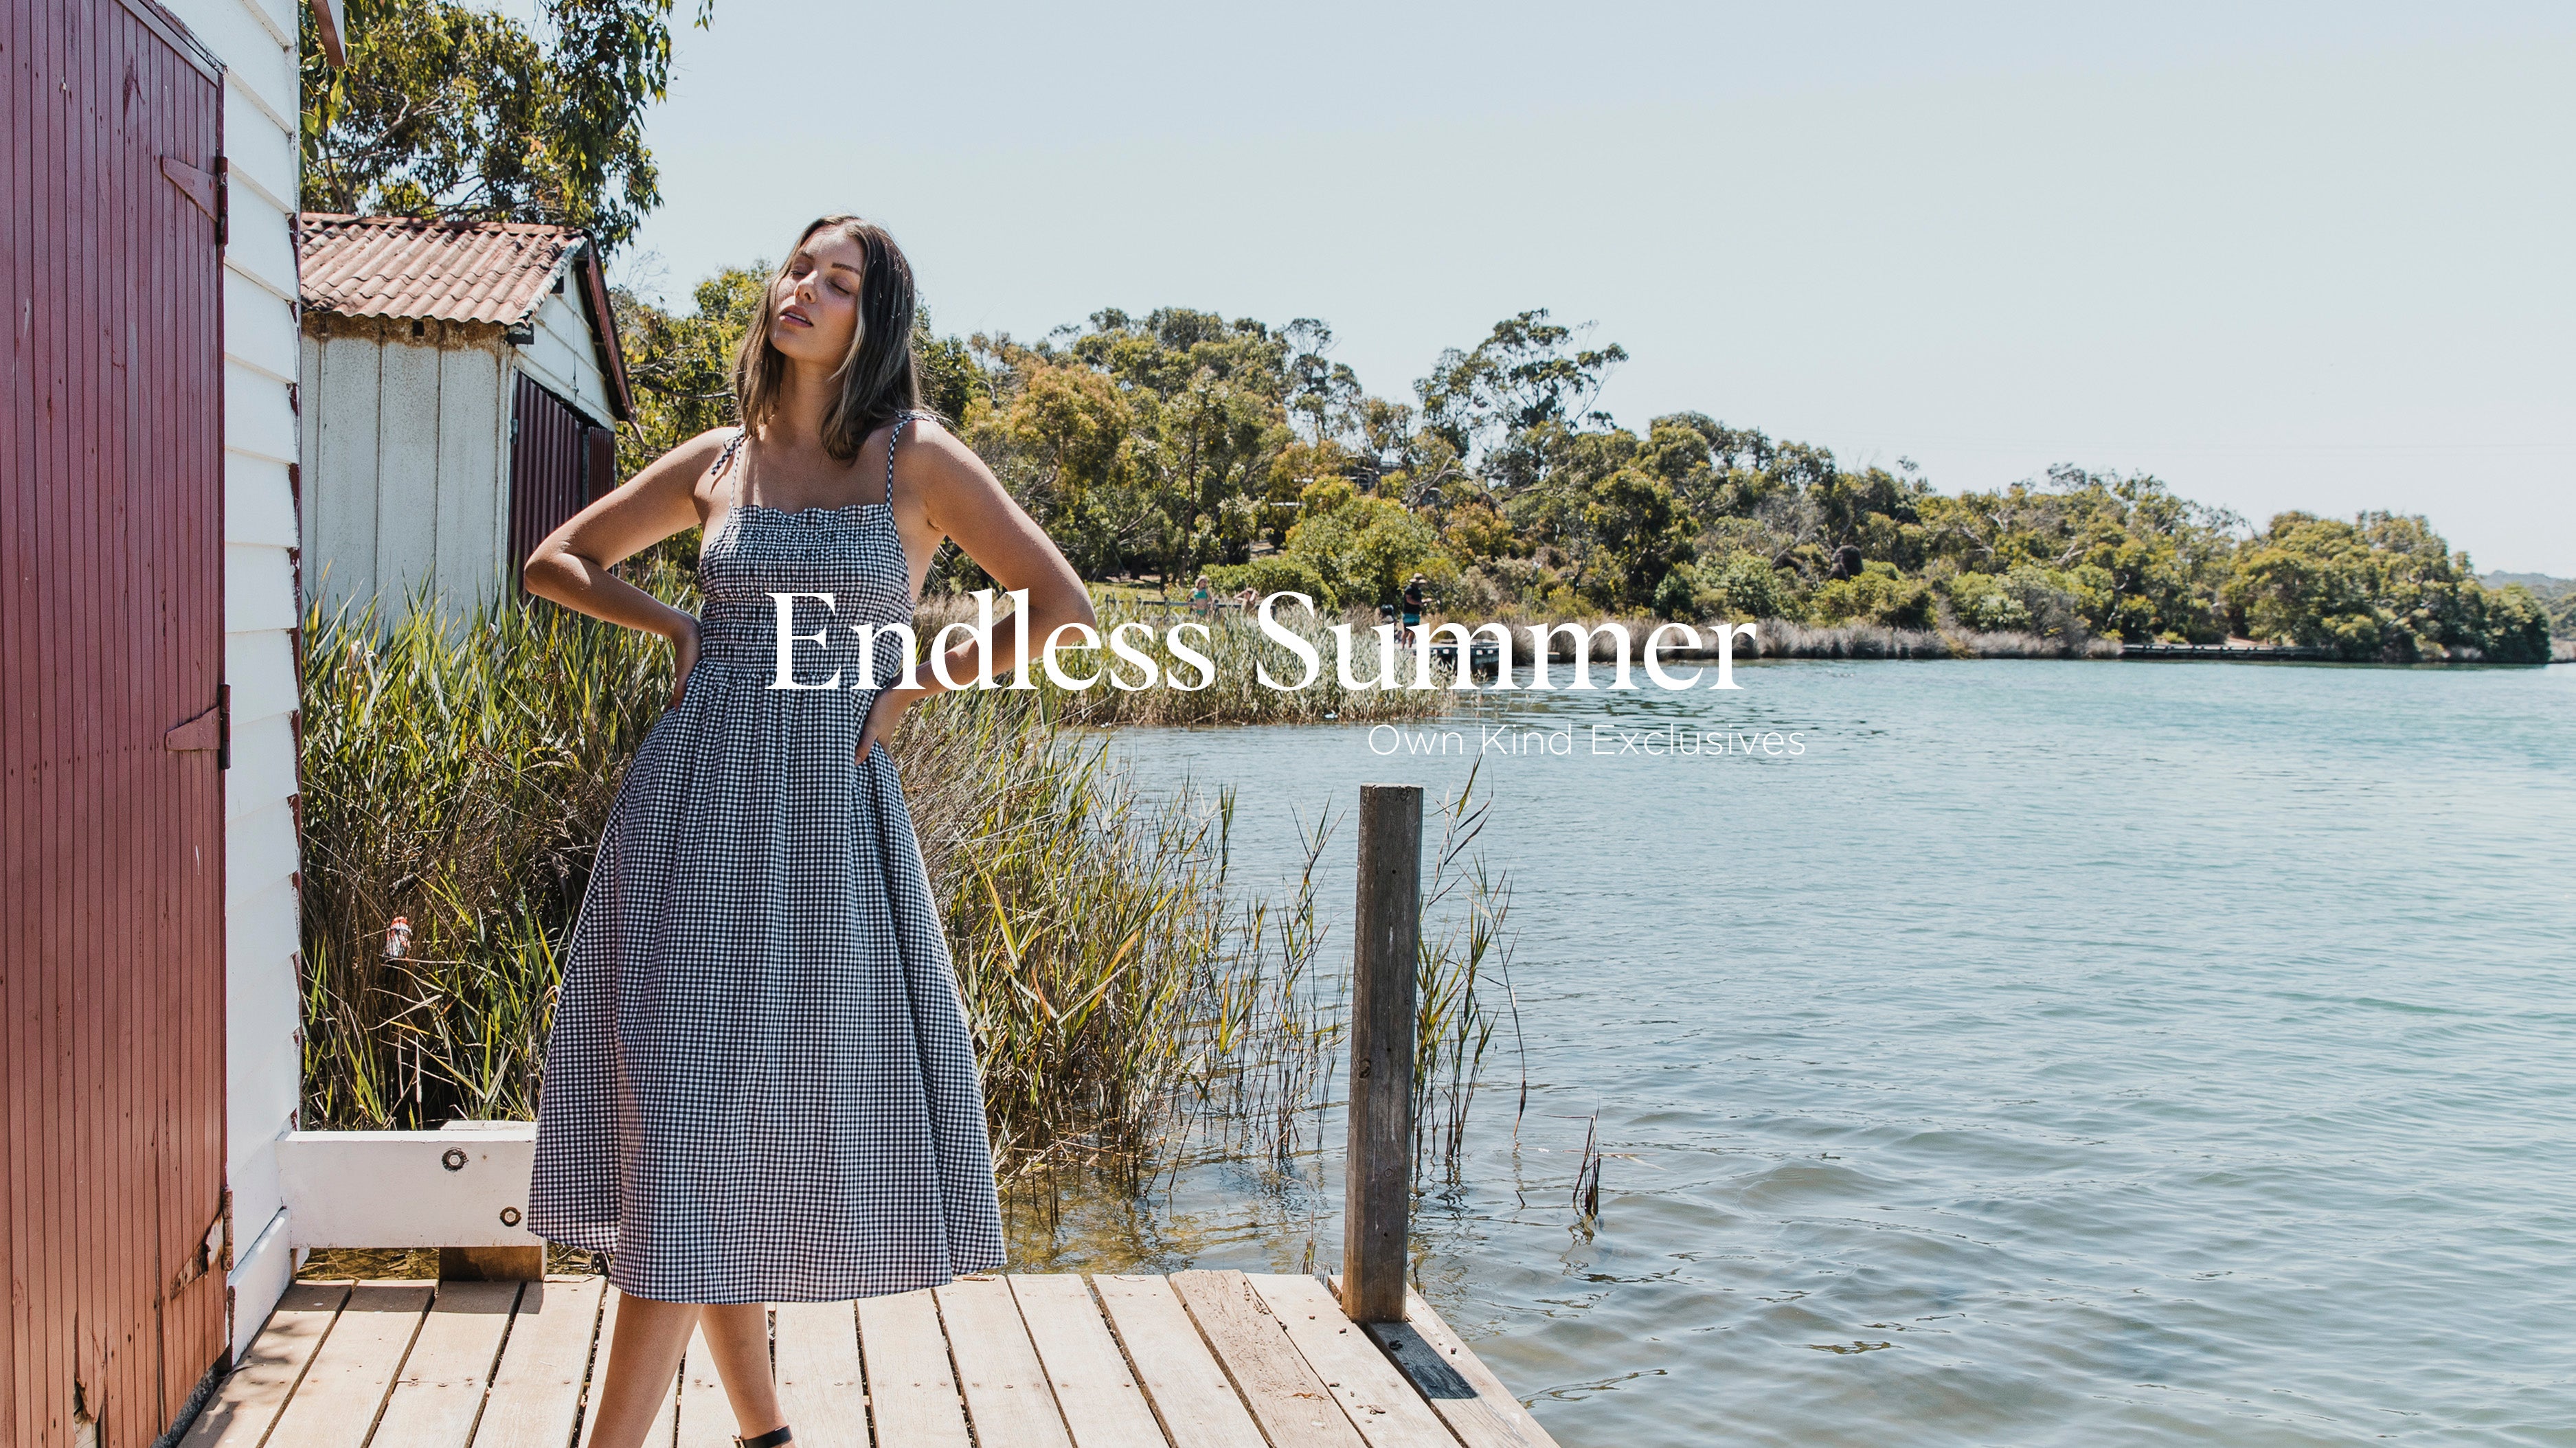 Endless Summer - Own Kind Exclusives latest releases